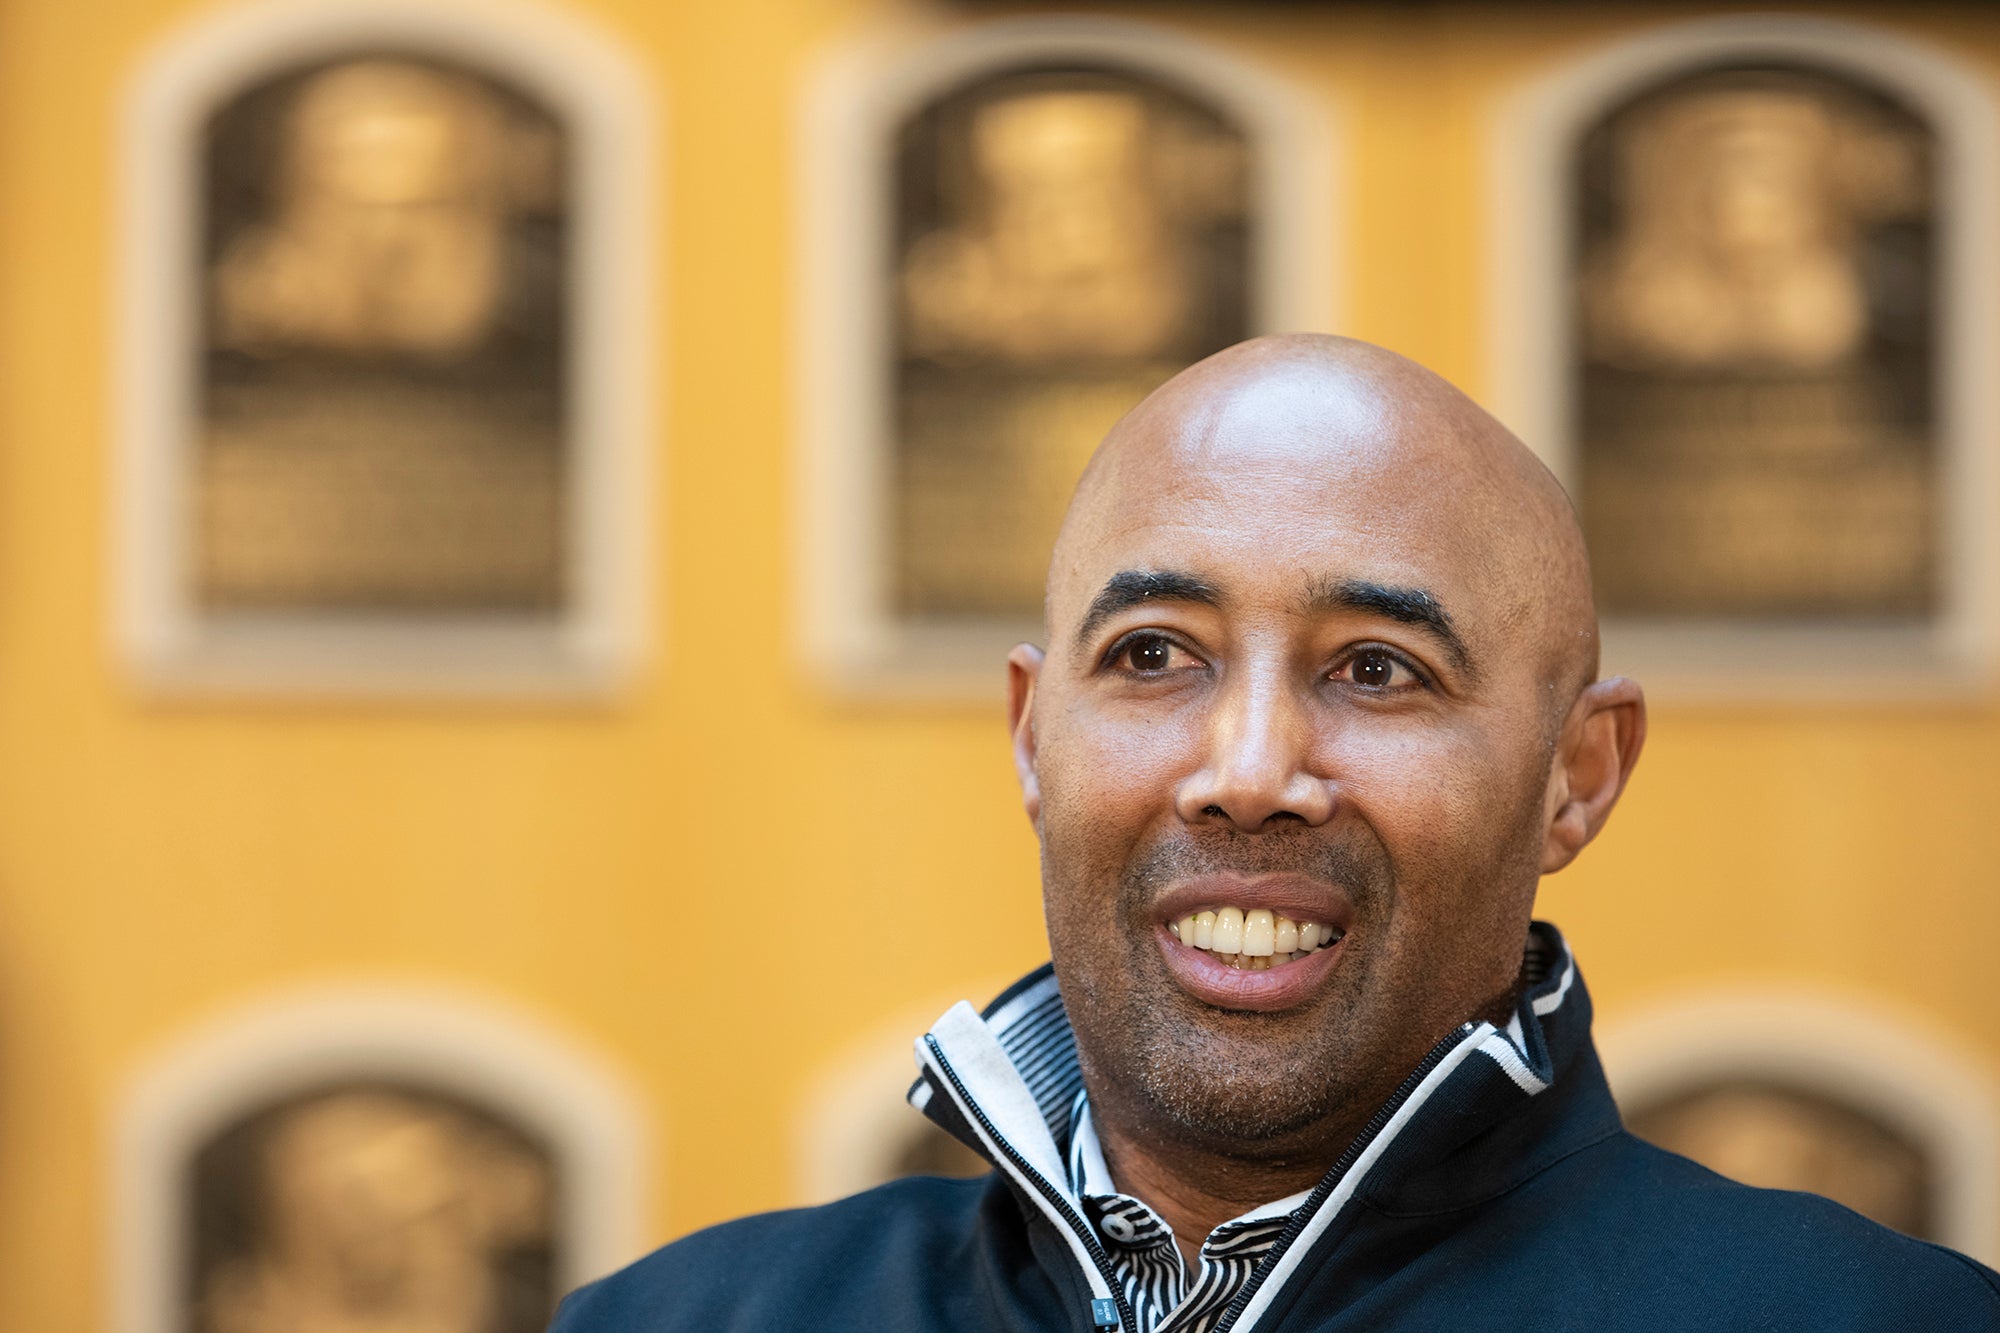 Harold Baines tours Hall of Fame during Orientation Visit